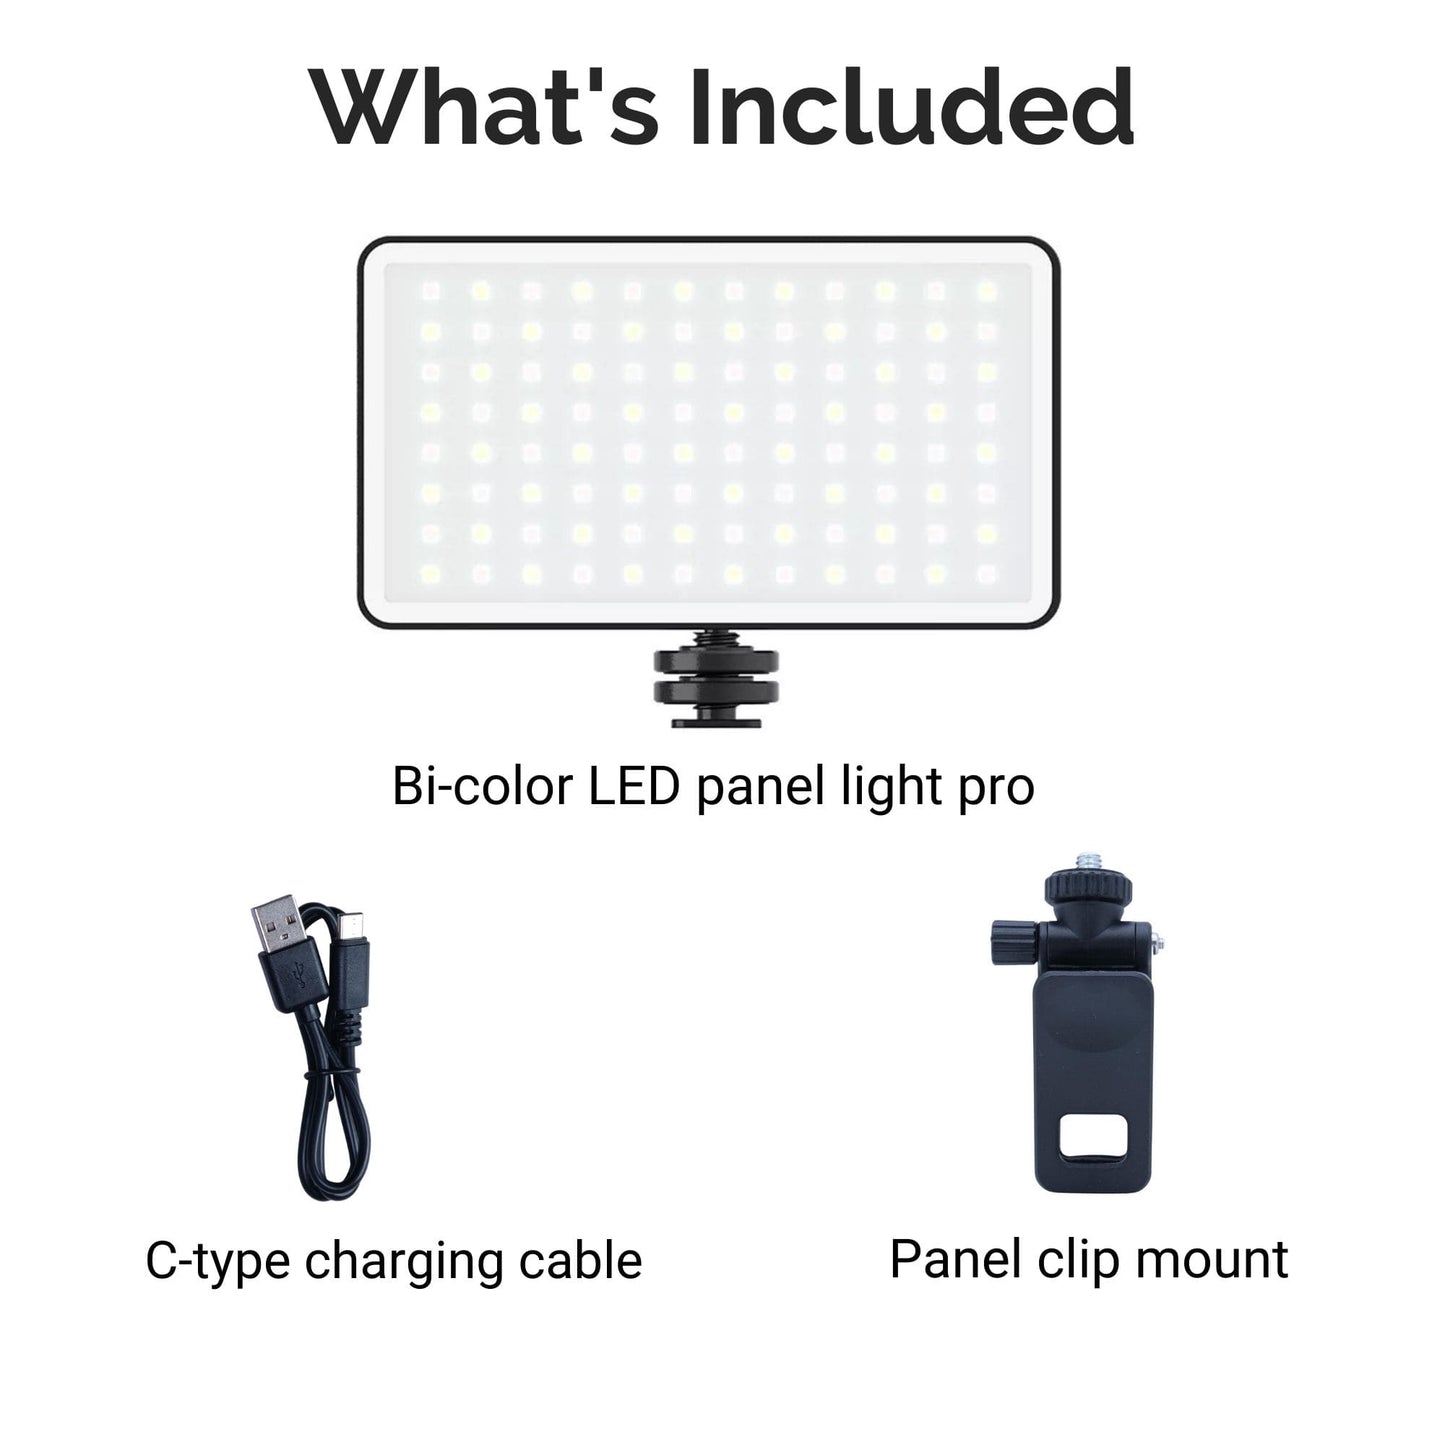 LED Bicolor Panel Light Main Product Photos Included in box